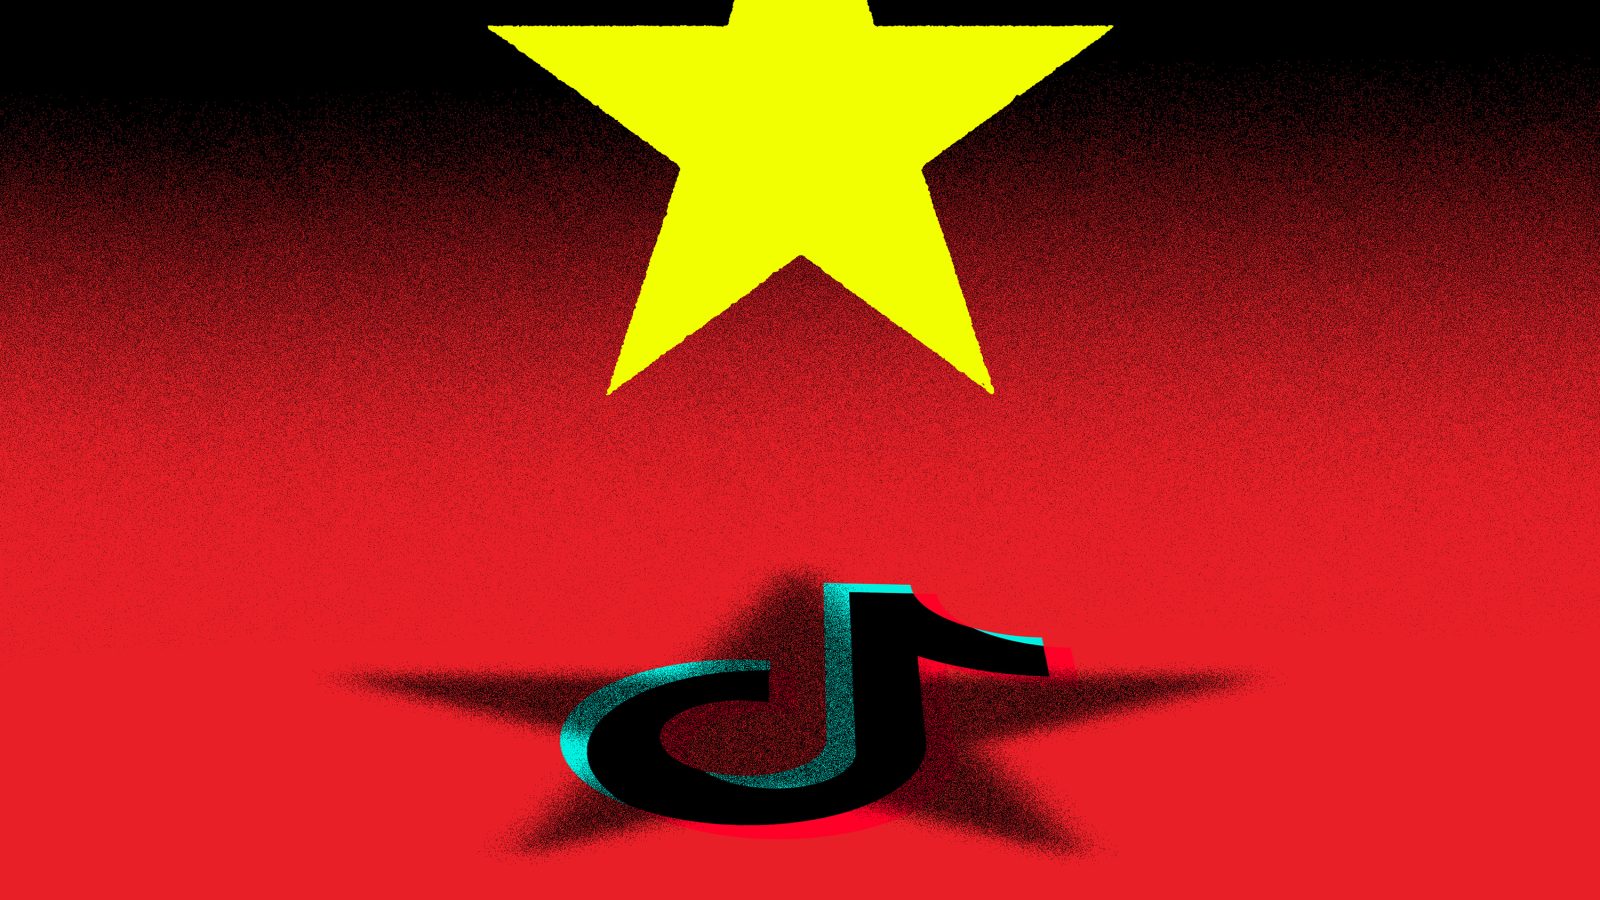 While in the U.S., TikTok faces criticism for perceived censorship, the government in Vietnam is urging the platform to further intervene in content moderation. (Photo Internet reproduction)